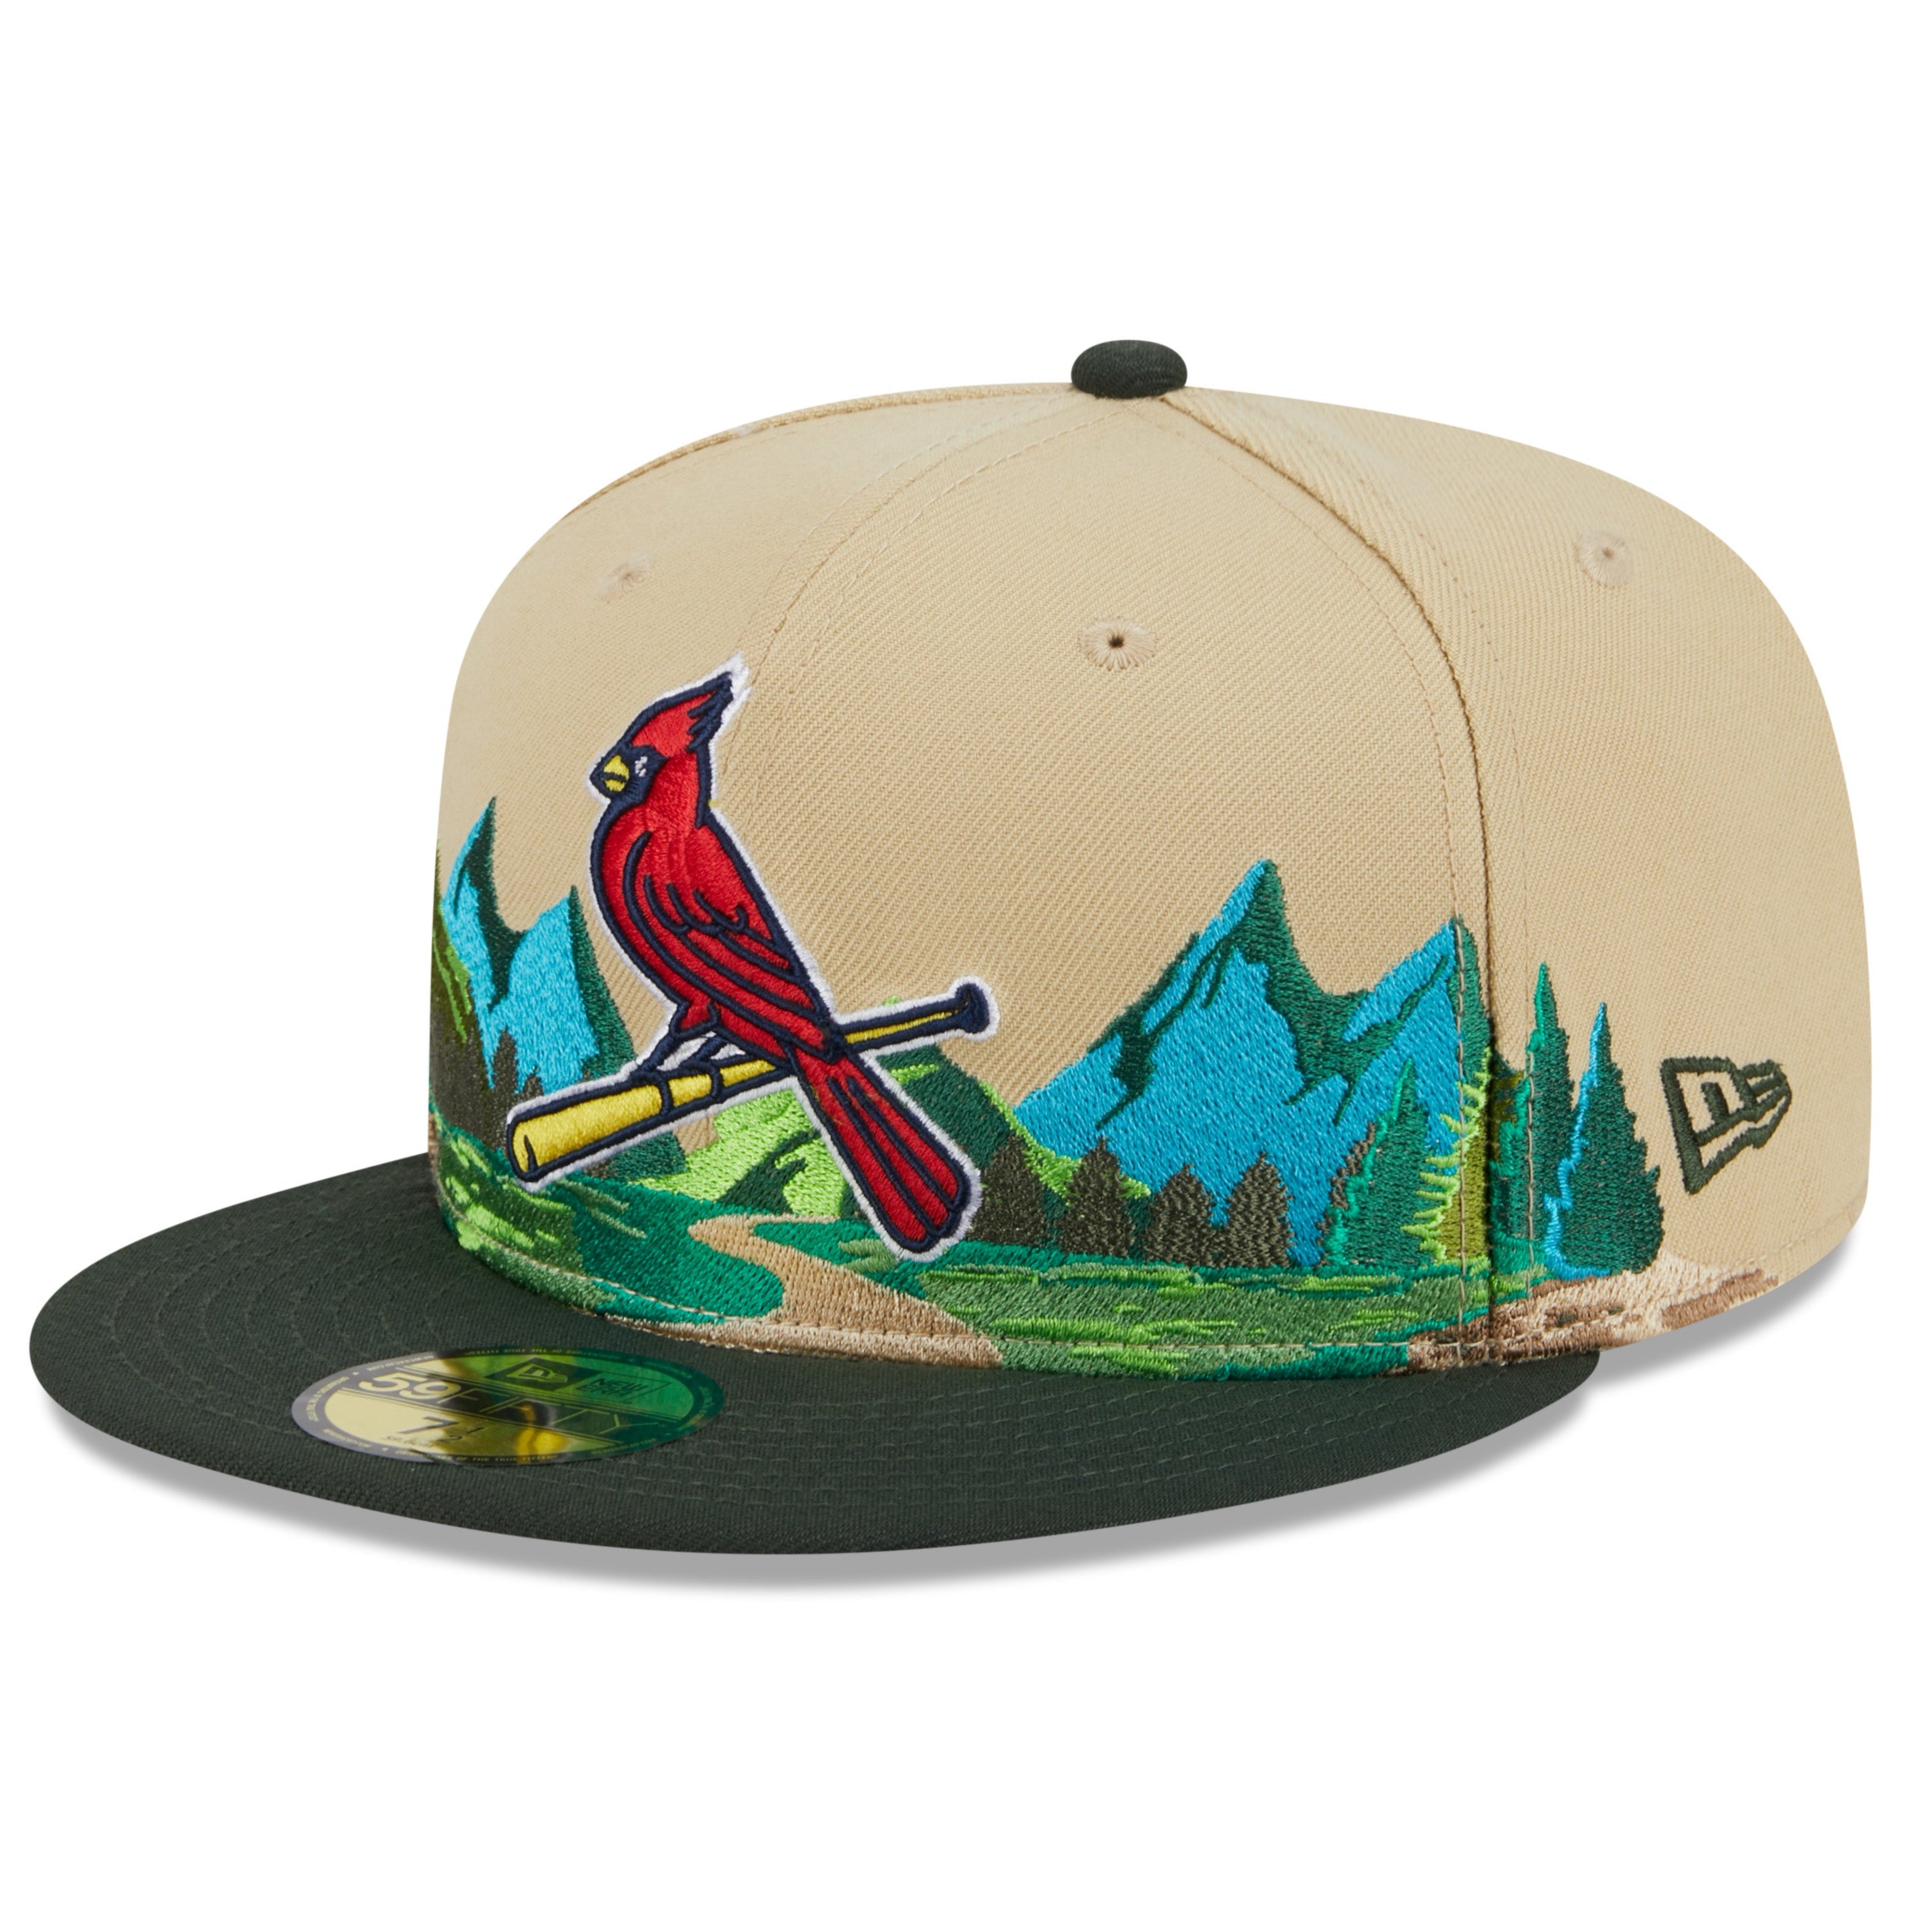 NEW ERA 59FIFTY MLB ST. LOUIS CARDINALS TEAM LANDSCAPE TWO TONE / GREY UV FITTED CAP